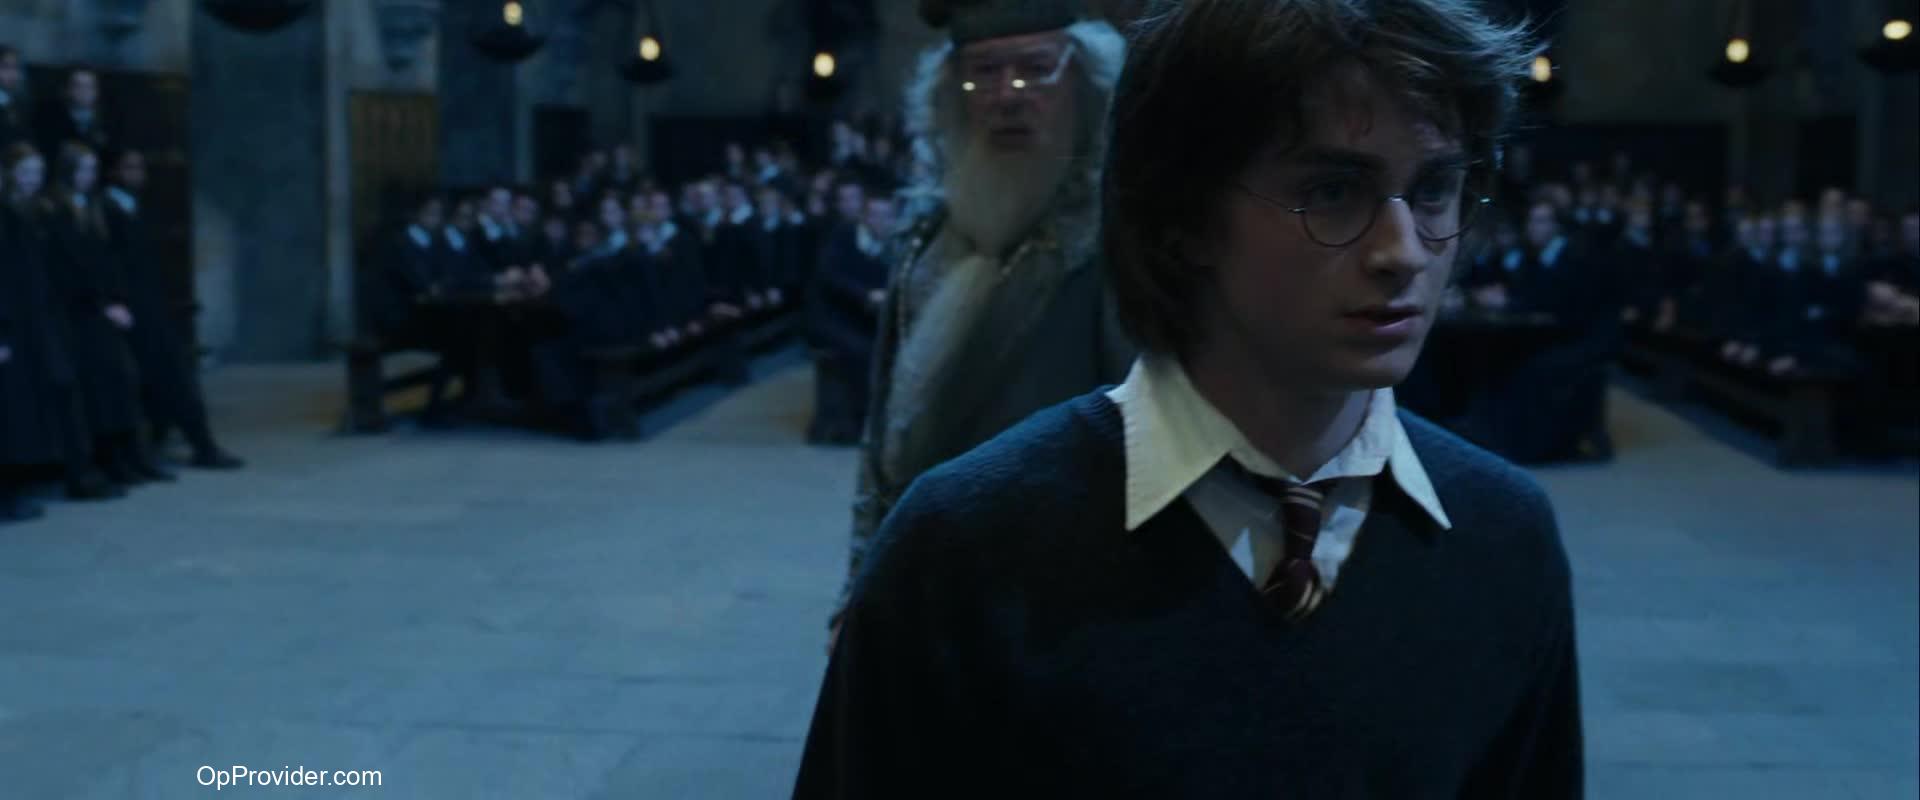 Download Harry Potter The Goblet Of Fire (2005) Full Movie in 480p 720p 1080p